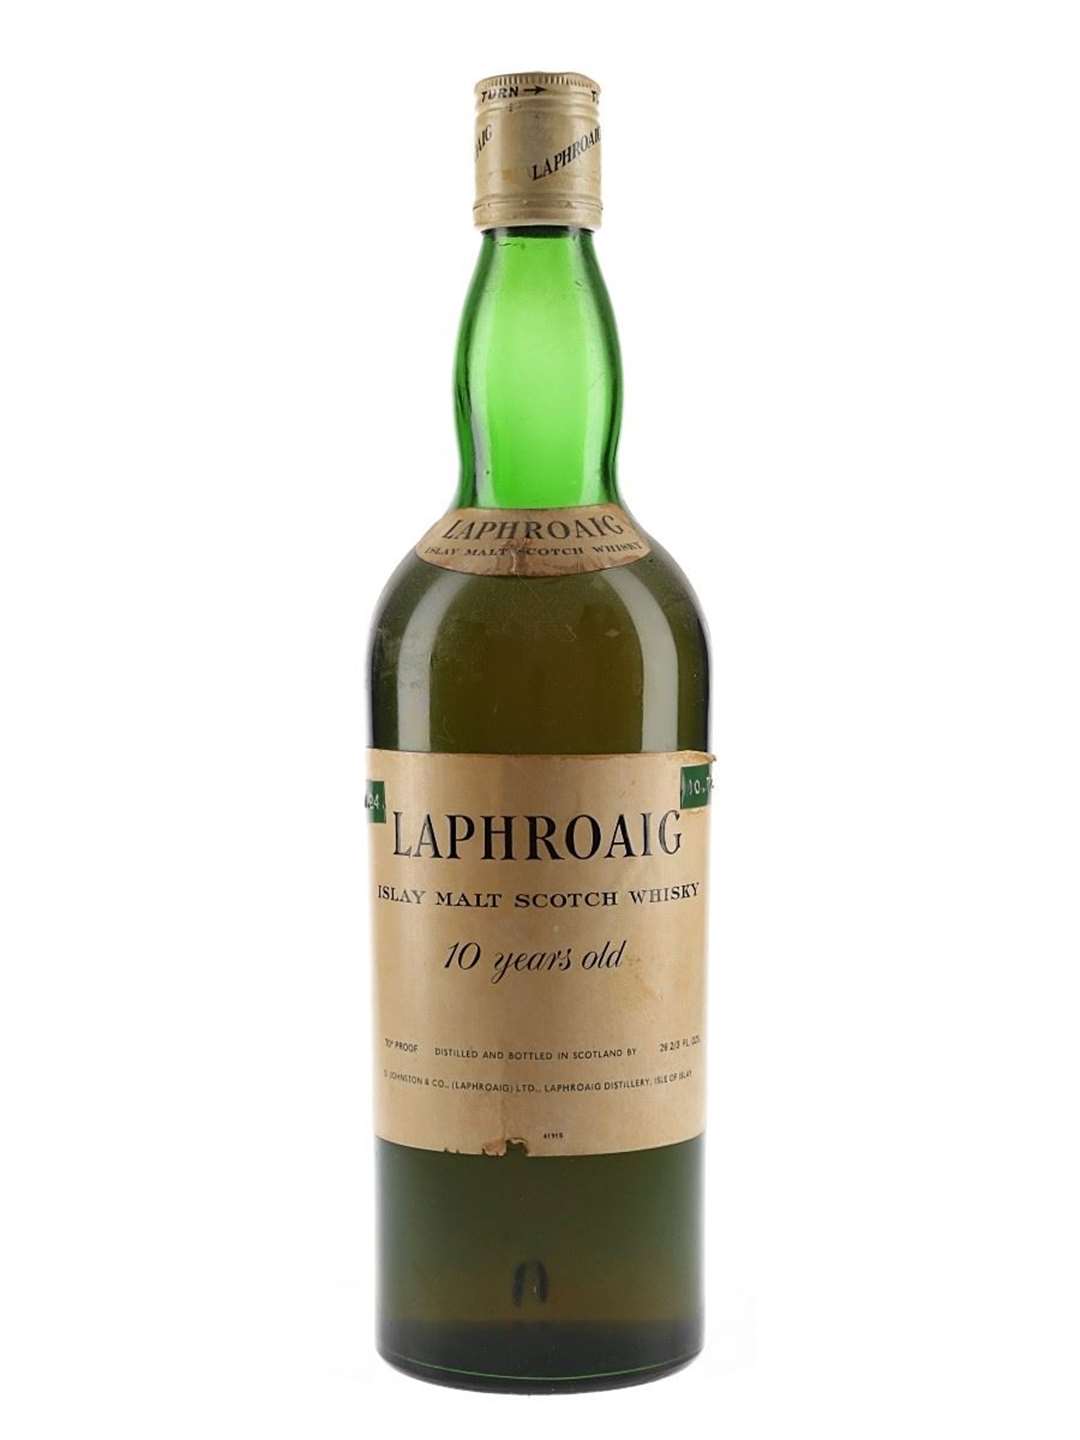 A 10-year-old Laphroig bottled in the 1970s went for £2,000. Image from whisky.auction